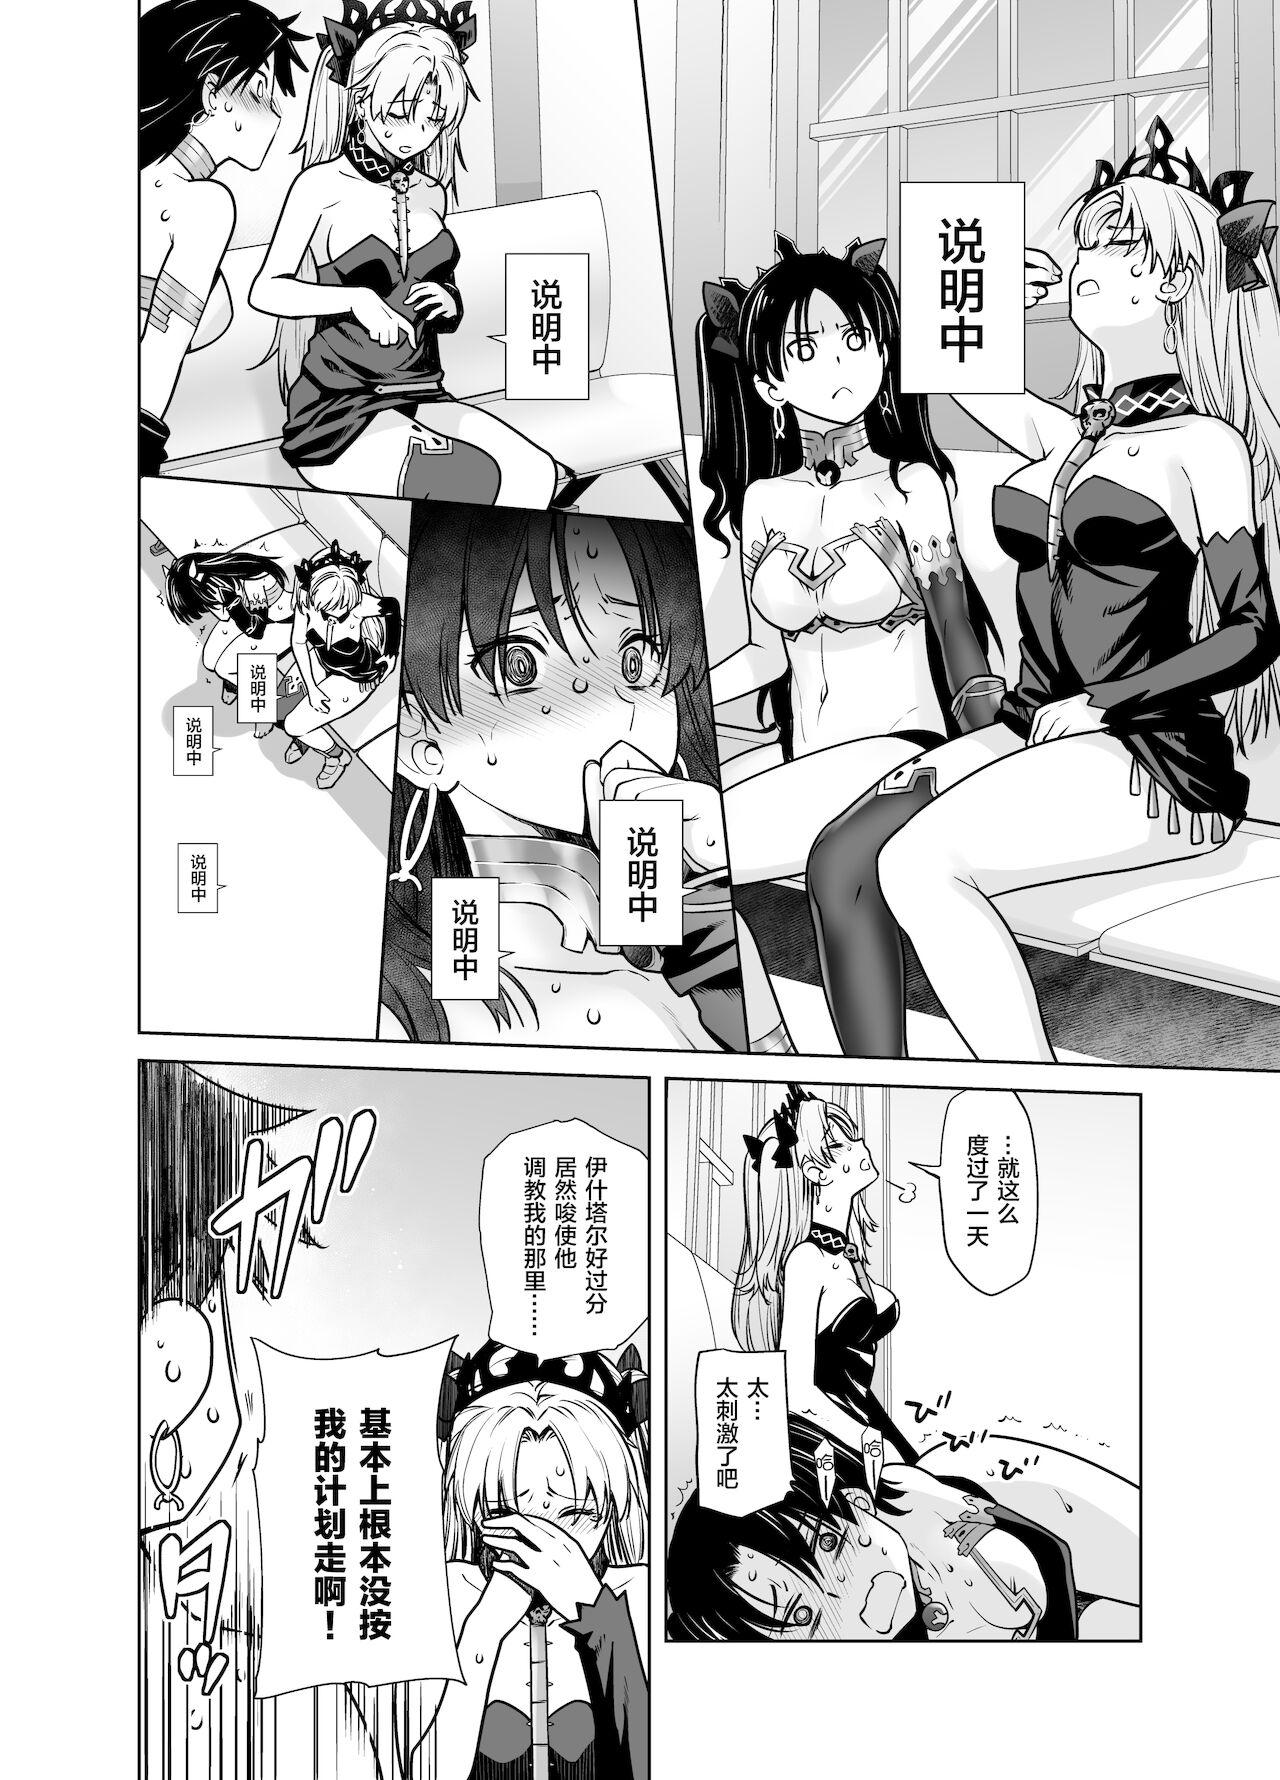 Pussy Play HEAVEN'S DRIVE 10 - Fate grand order Peruana - Page 8